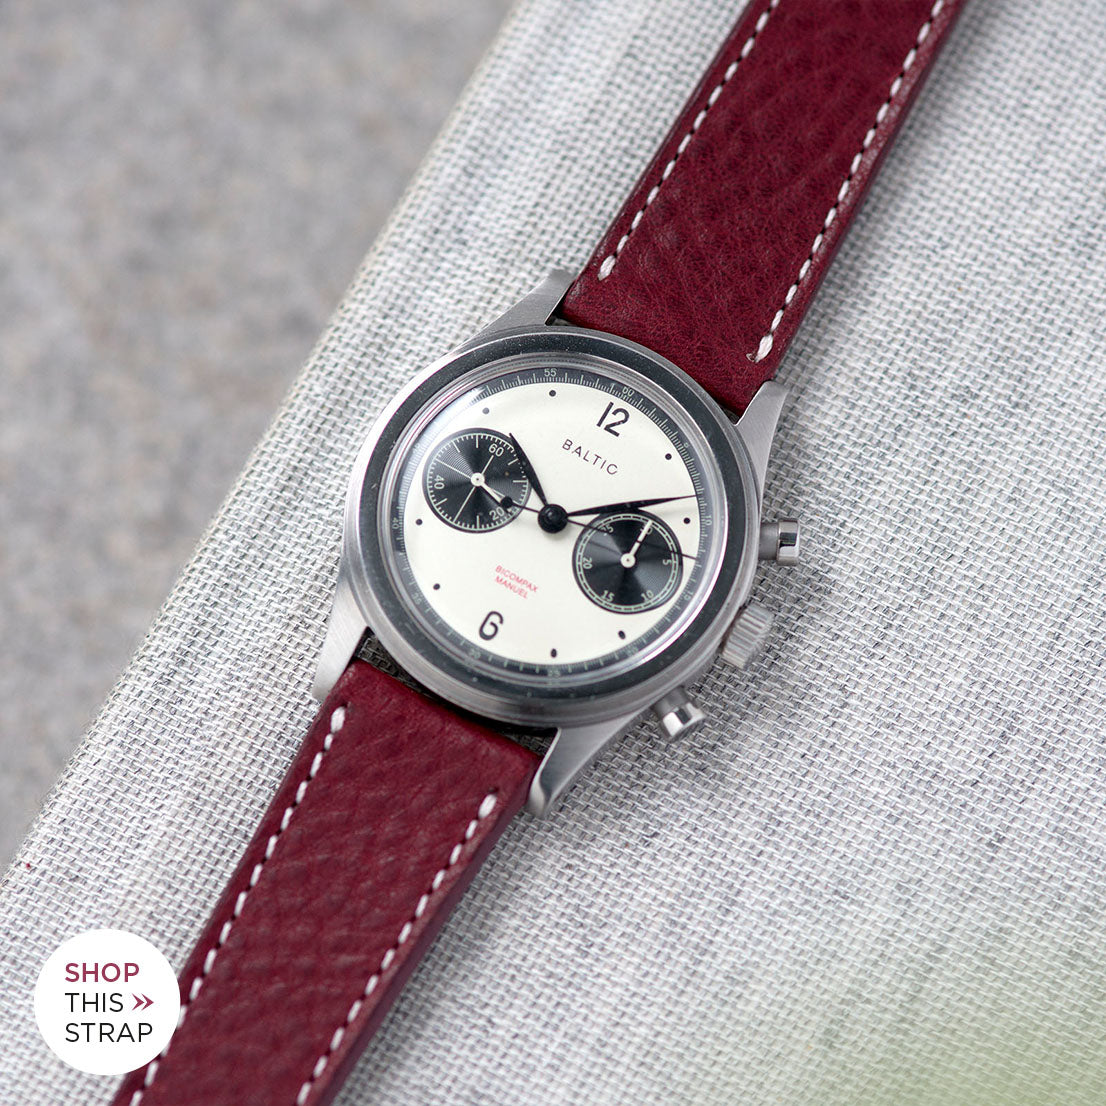 Bulang and Sons_Strap Guide_The Baltic-Chronograph-Panda-Limited-Edition_Burgundy Red Leather Watch Strap